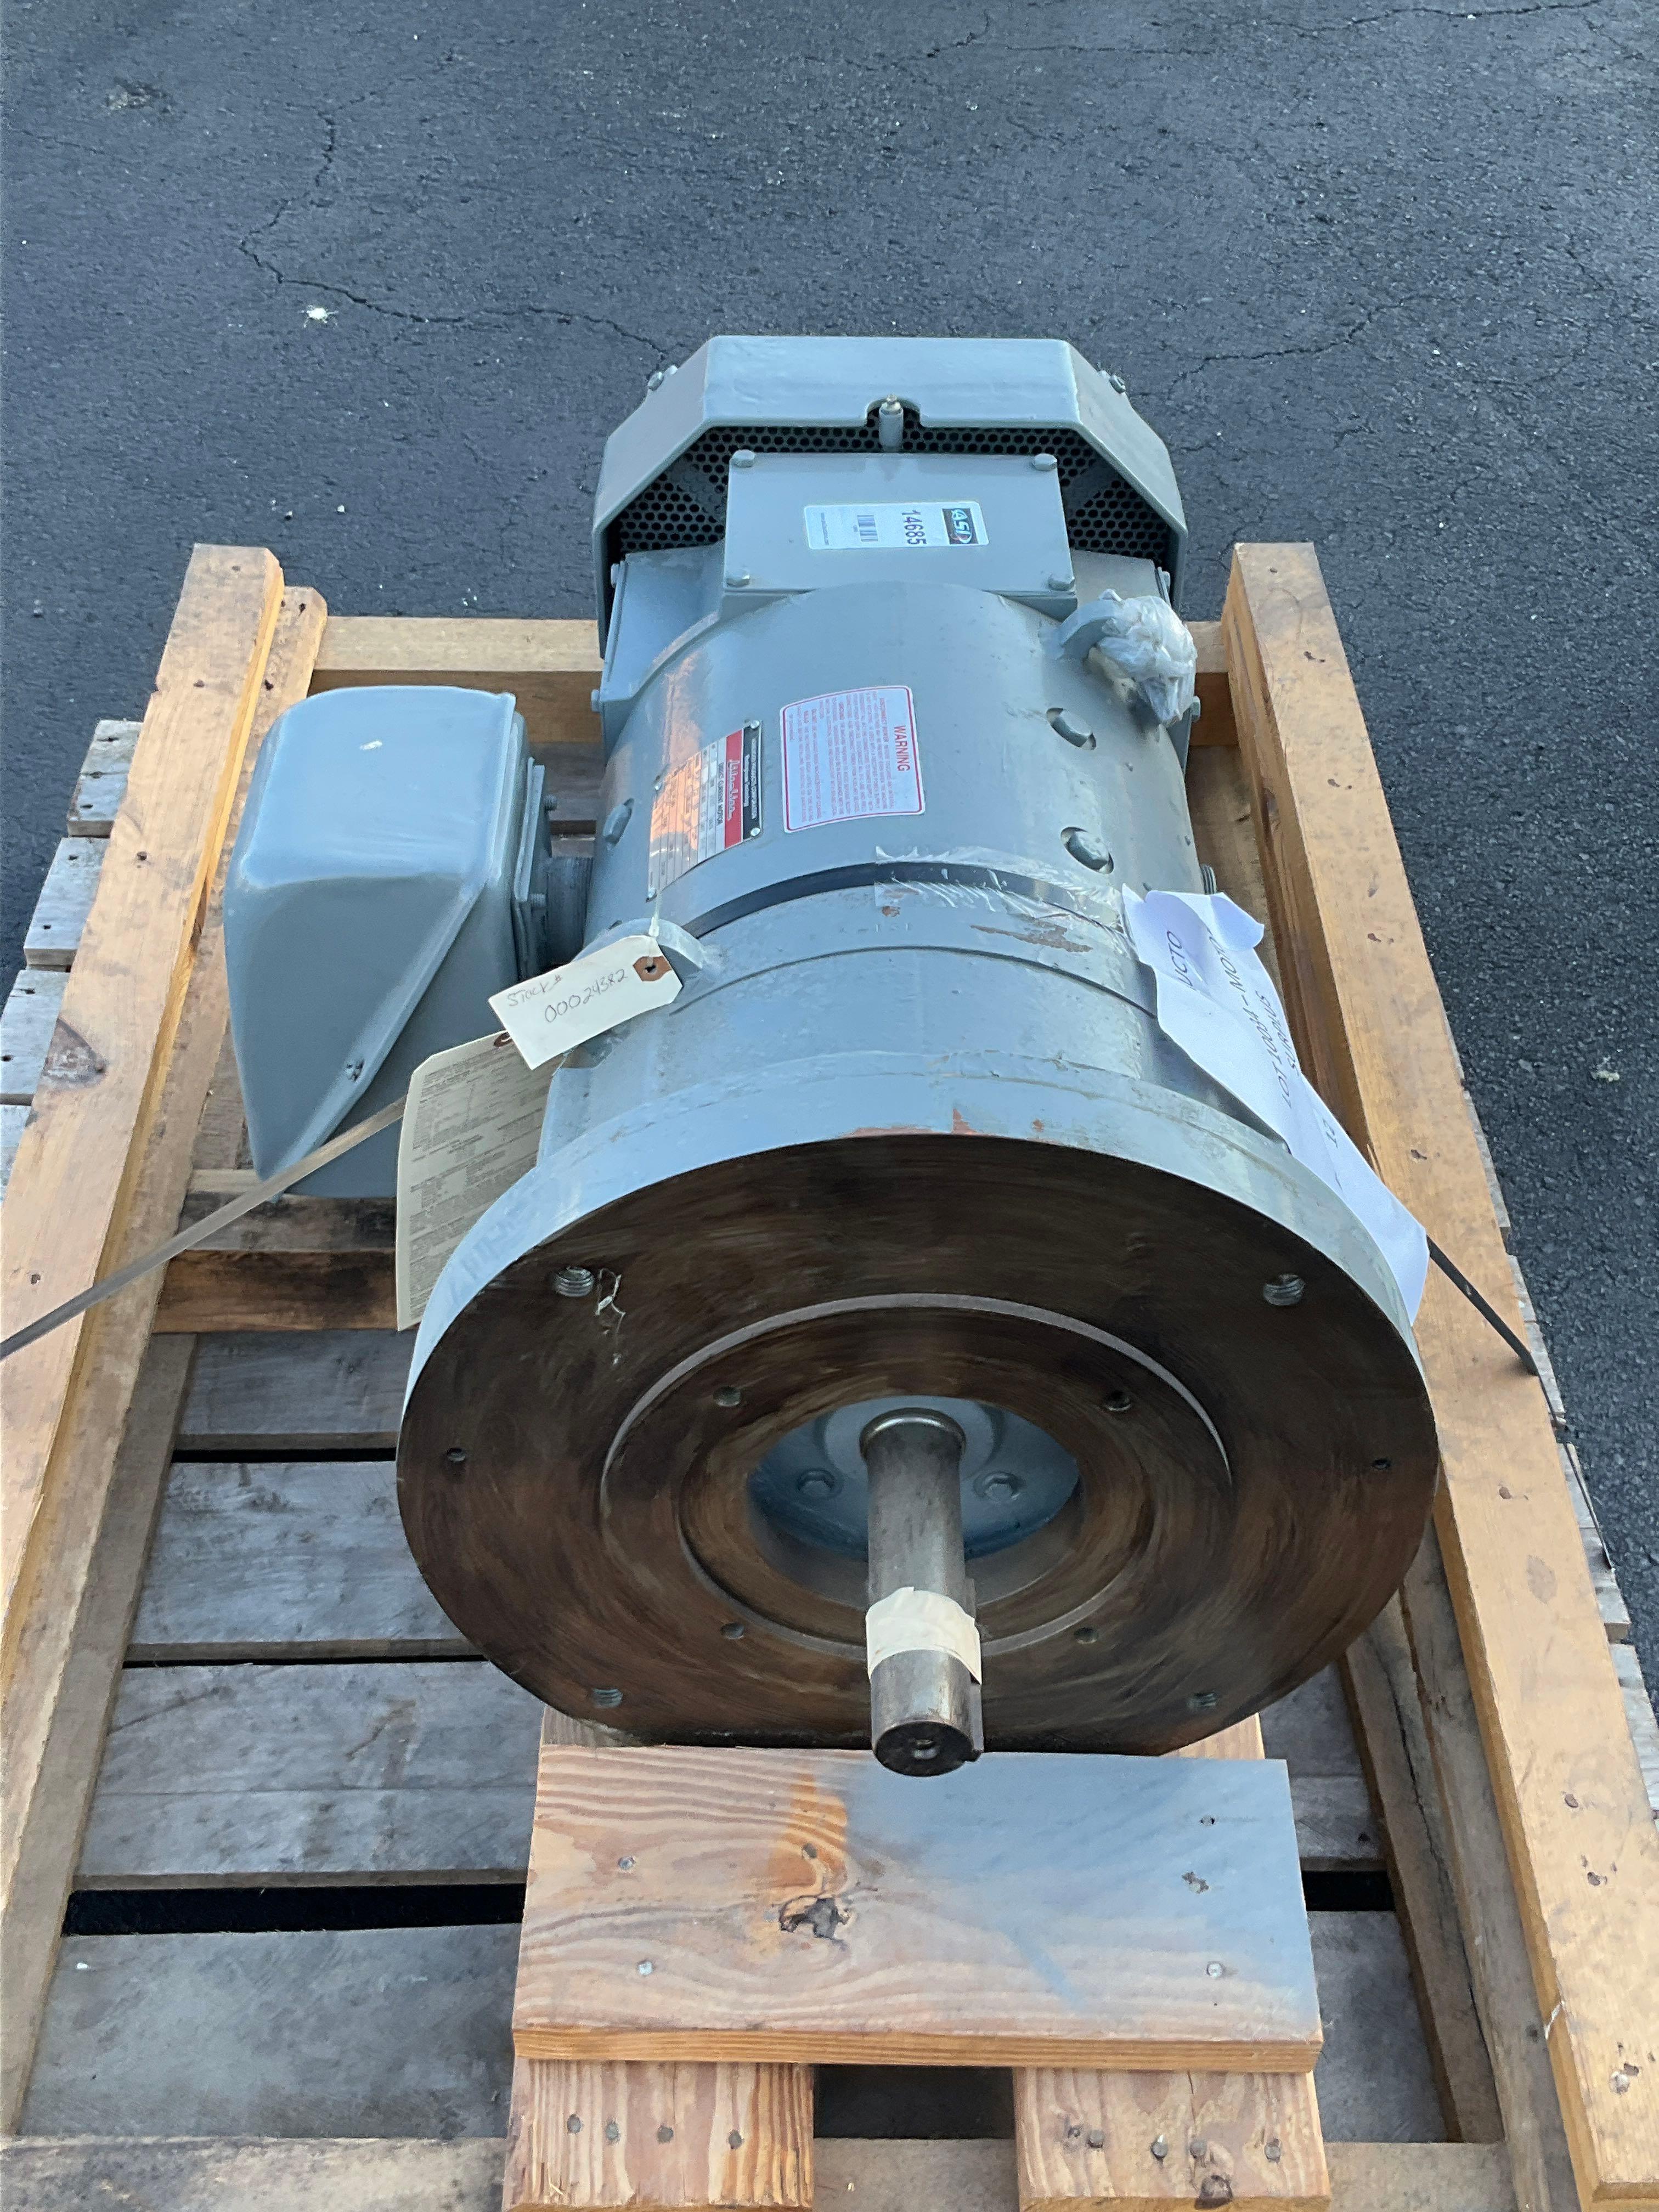 WESTINGHOUSE...DIRECT CURRENT MOTOR MODEL 1H11081, 15 HP, 3500 RPM, 120VDC, 113 AMP, APPROXIMATELY